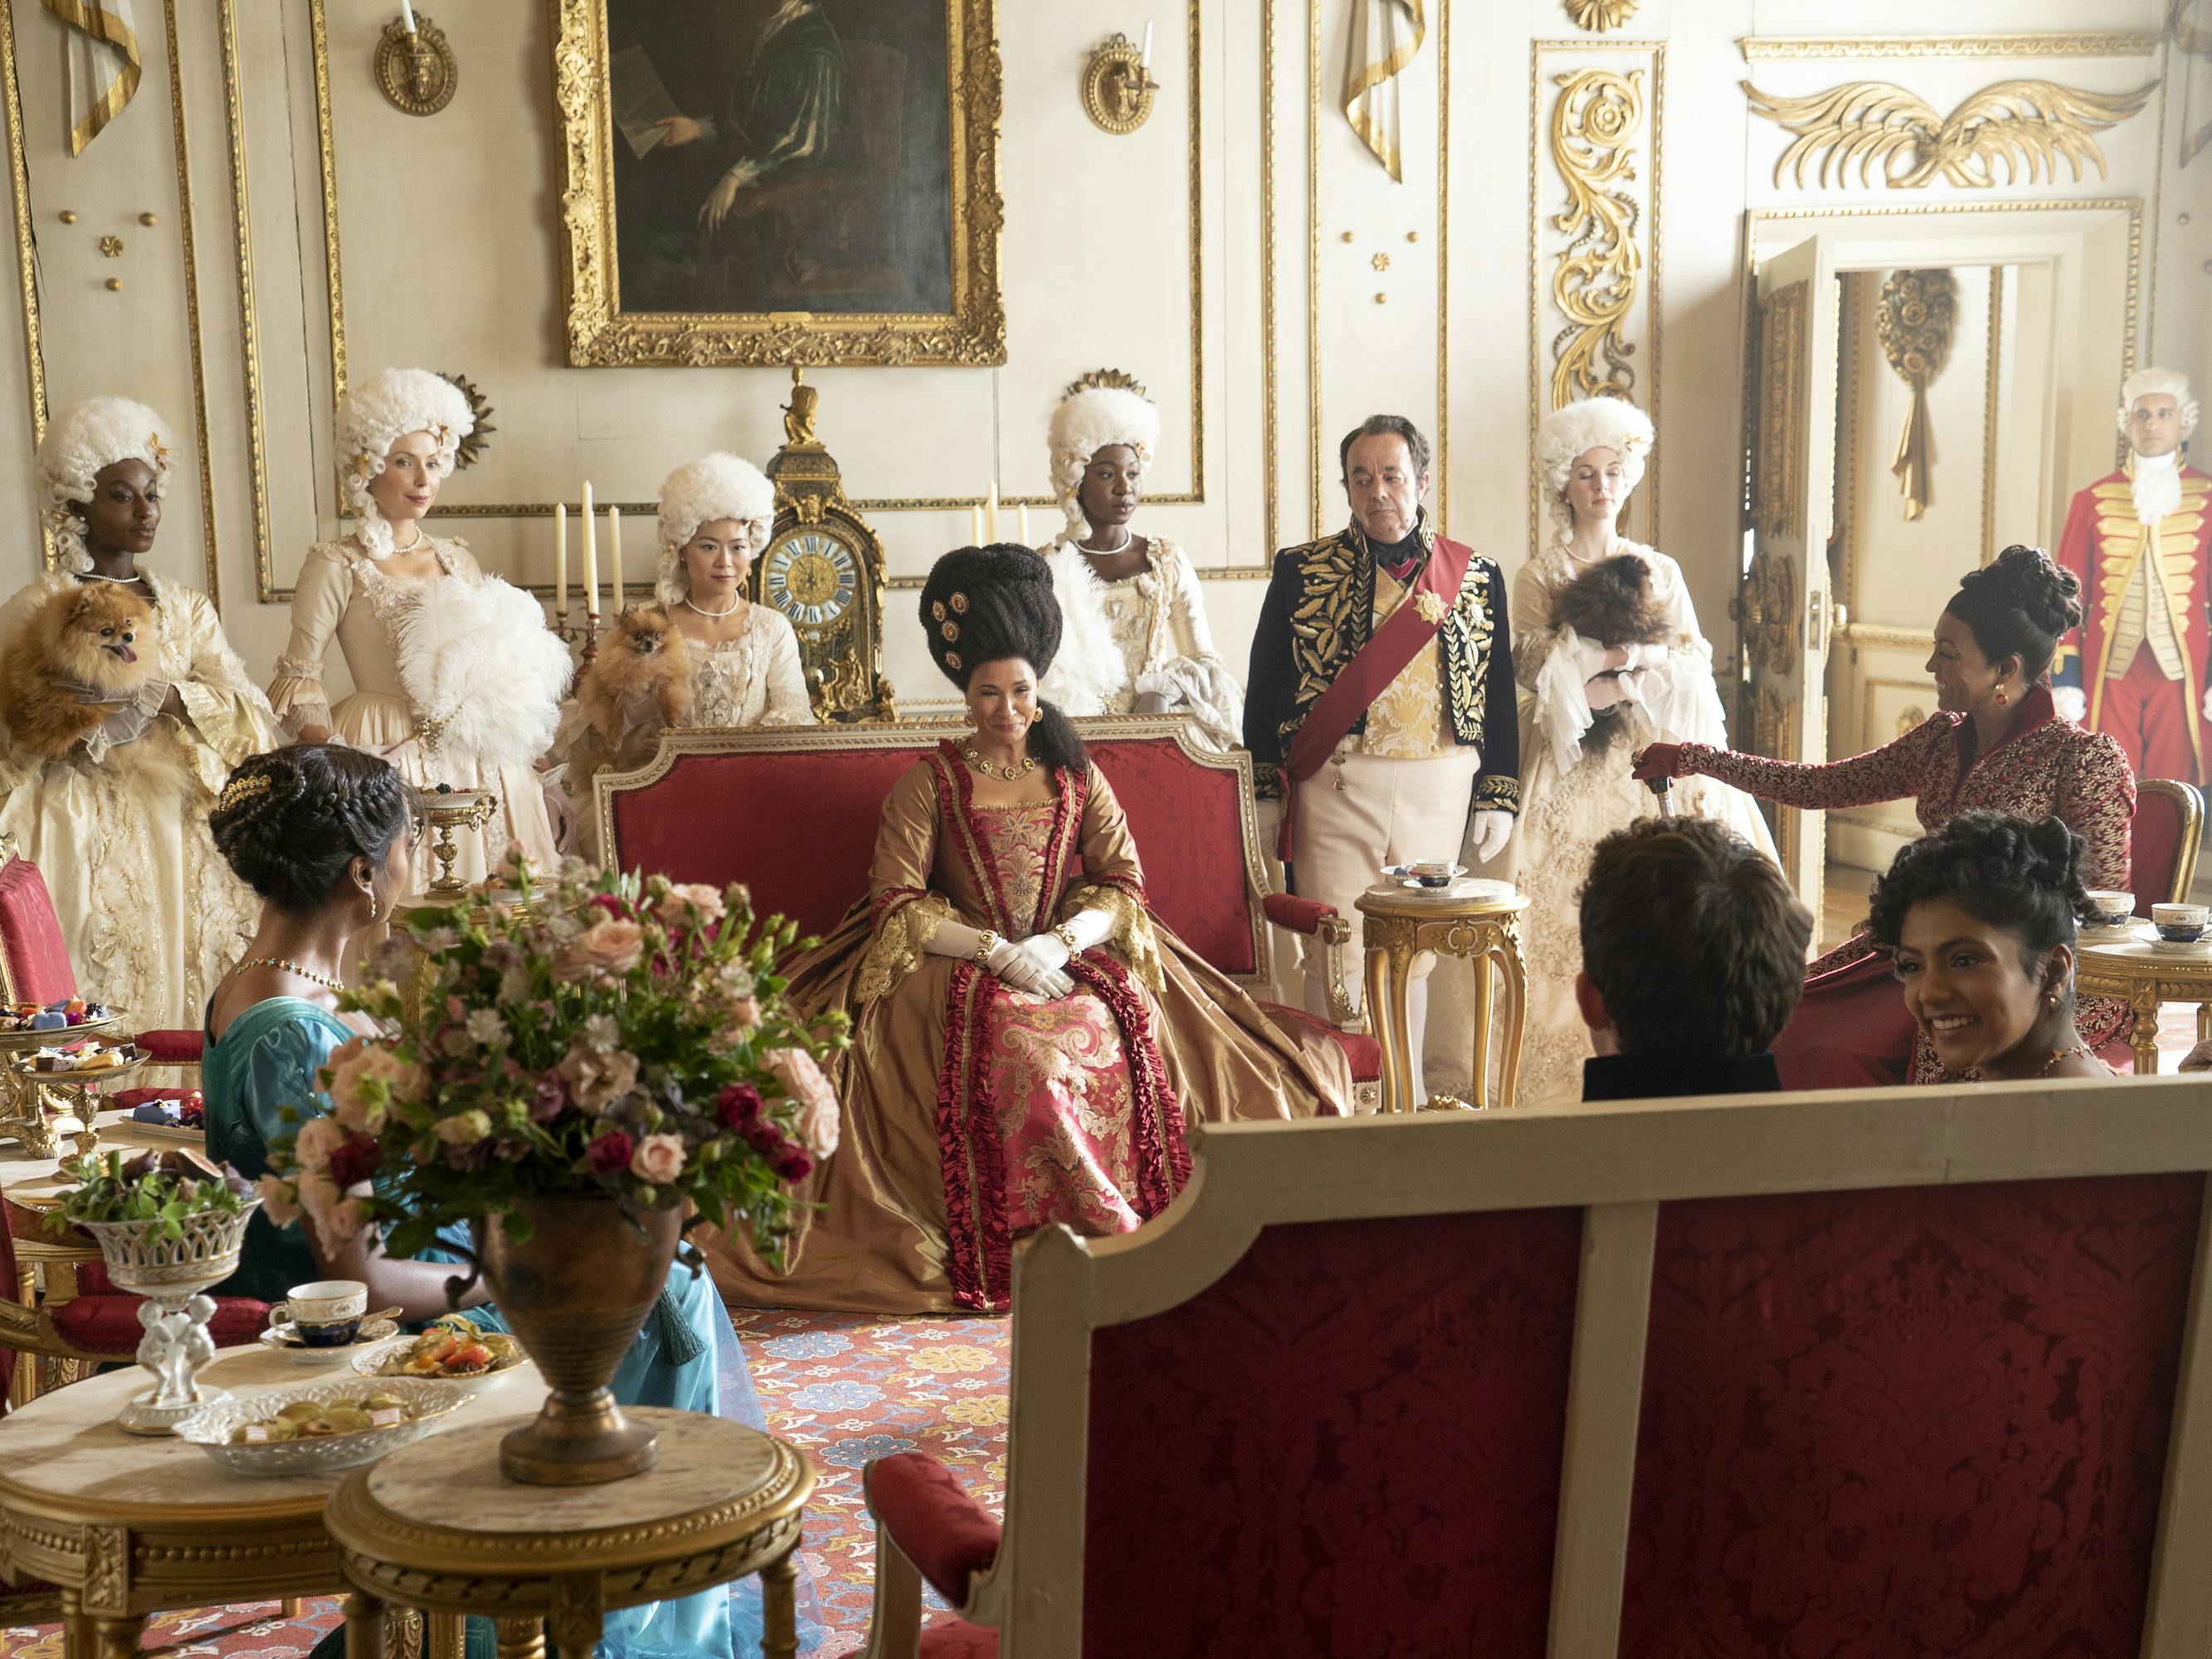 Kate Sharma (Simone Ashley), Queen Charlotte (Golda Rosheuvel), Lady Danbury (Adjoa Andoh), Edwina Sharma (Charithra Chandran), and Anthony Bridgerton (Jonathan Bailey) sit around an ornate living room surrounded by people in wigs.